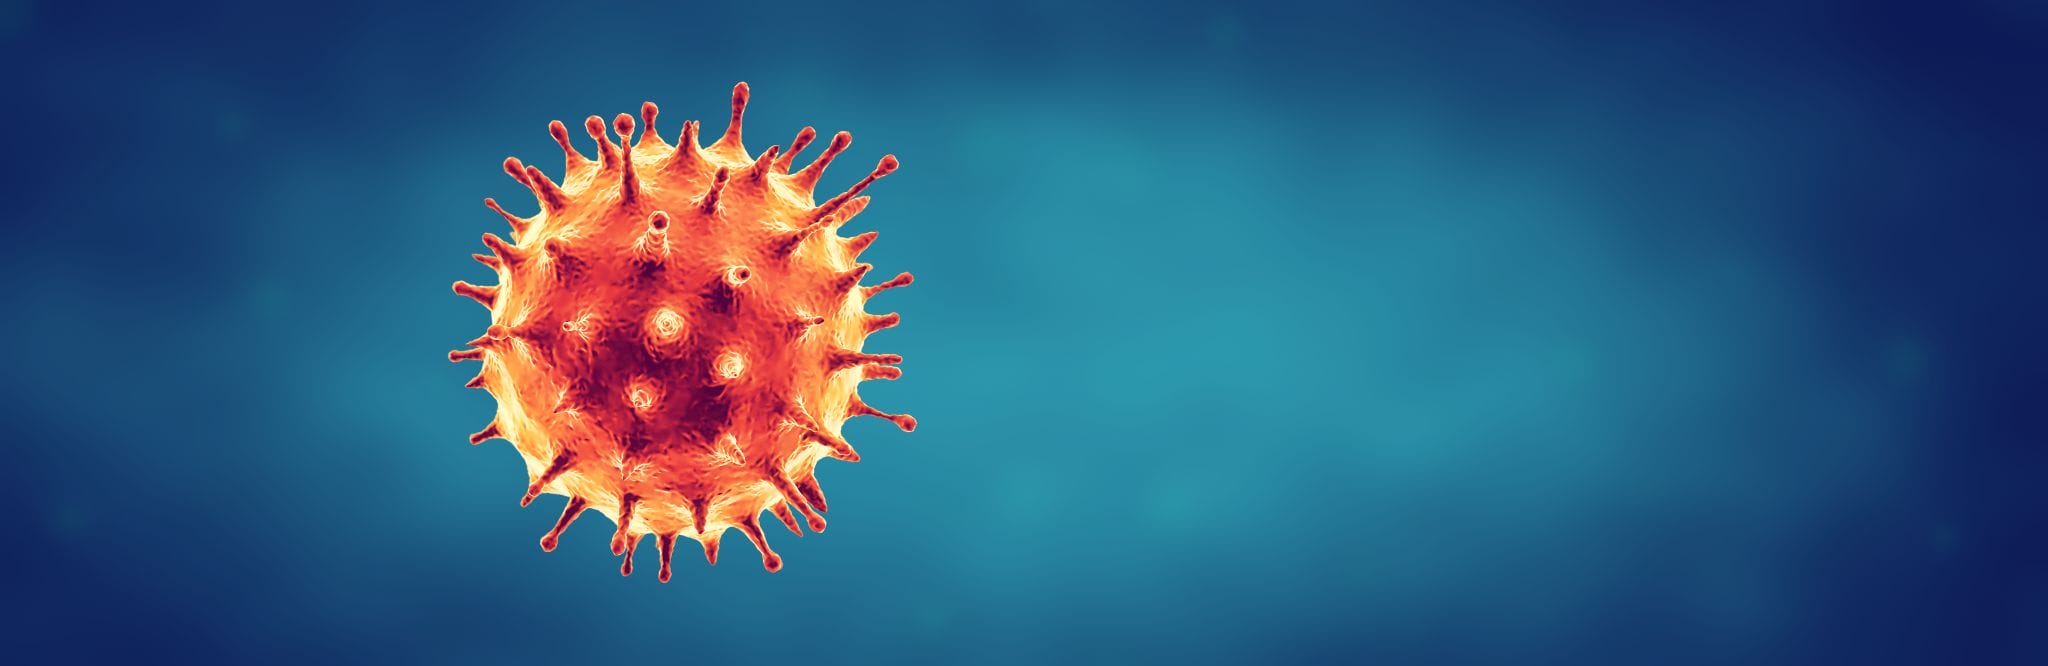 3d illustration of a virus particle with spike proteins against a blue background.